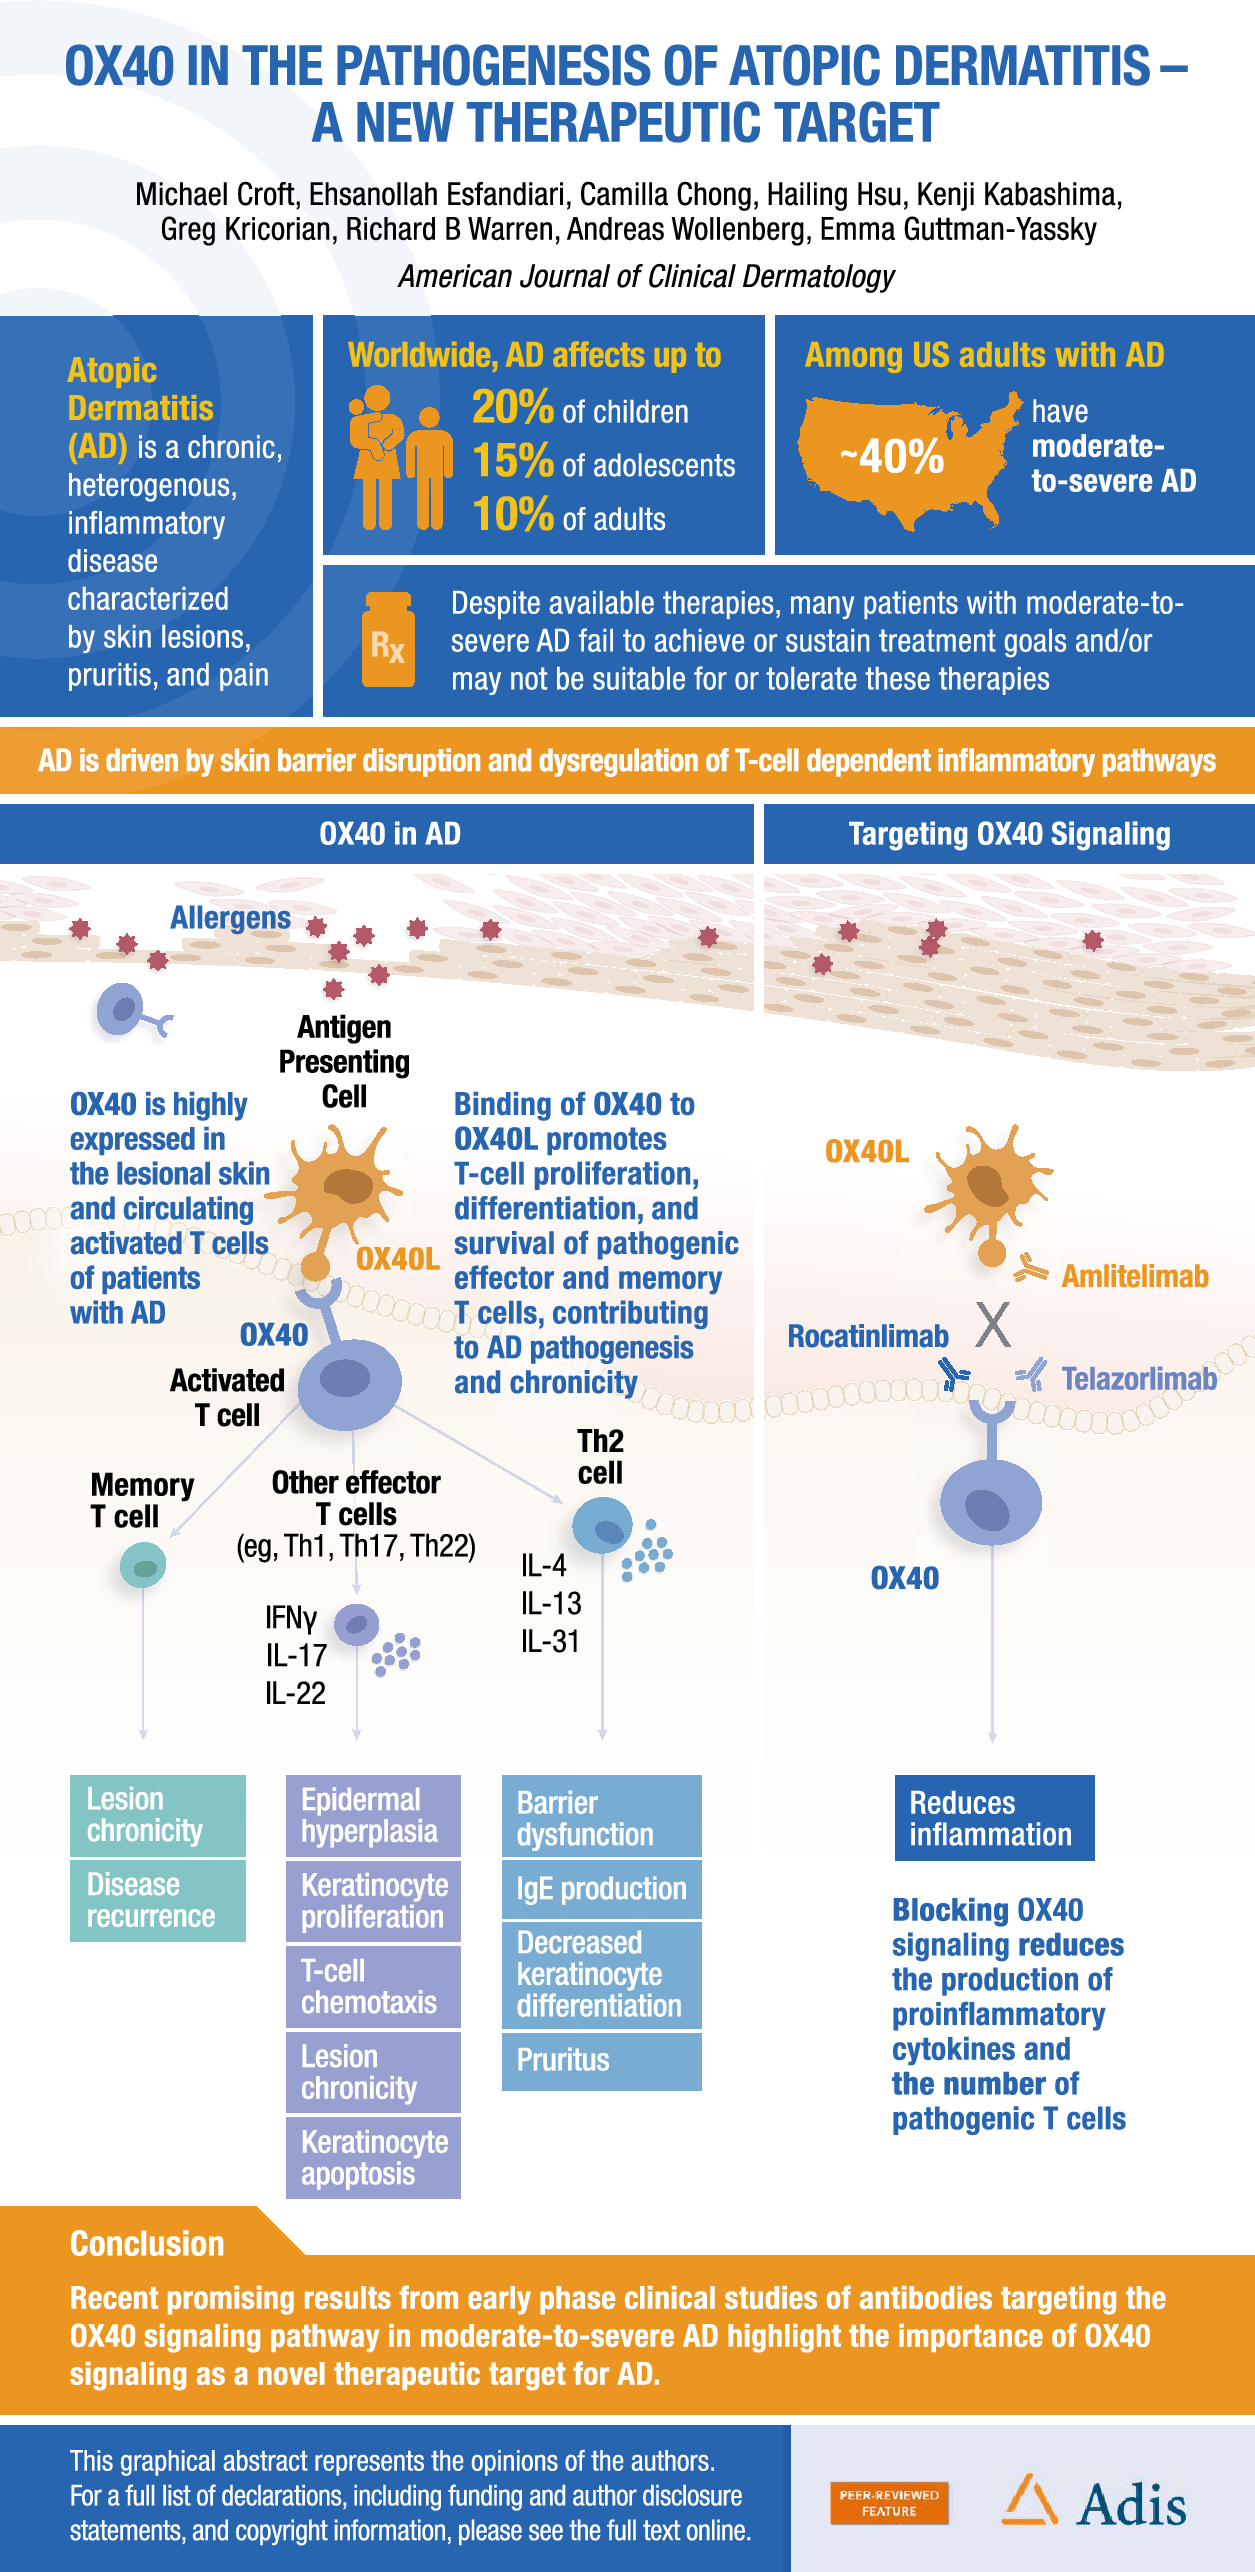 OX40 in the Pathogenesis of Atopic Dermatitis—A New Therapeutic Target